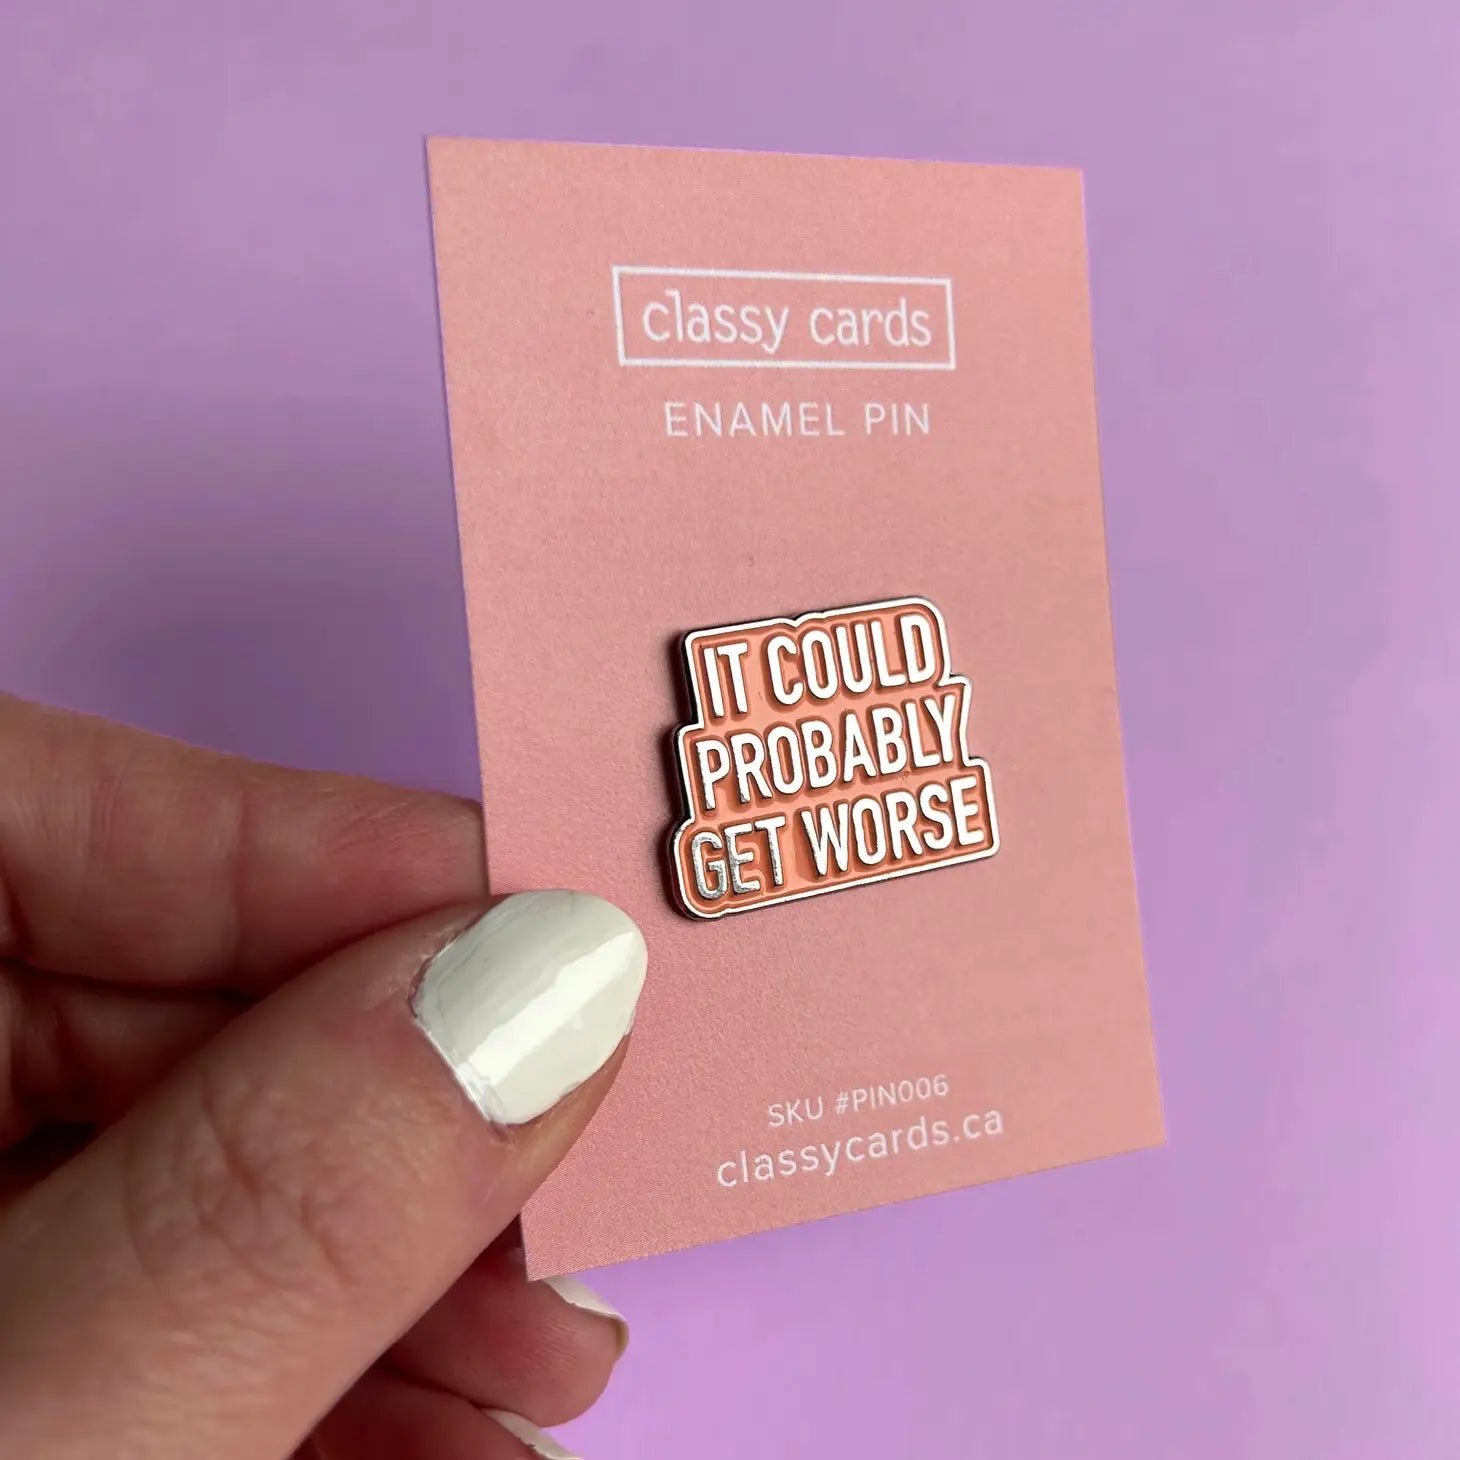 Classy Cards Enamel Pin - Could Get Worse